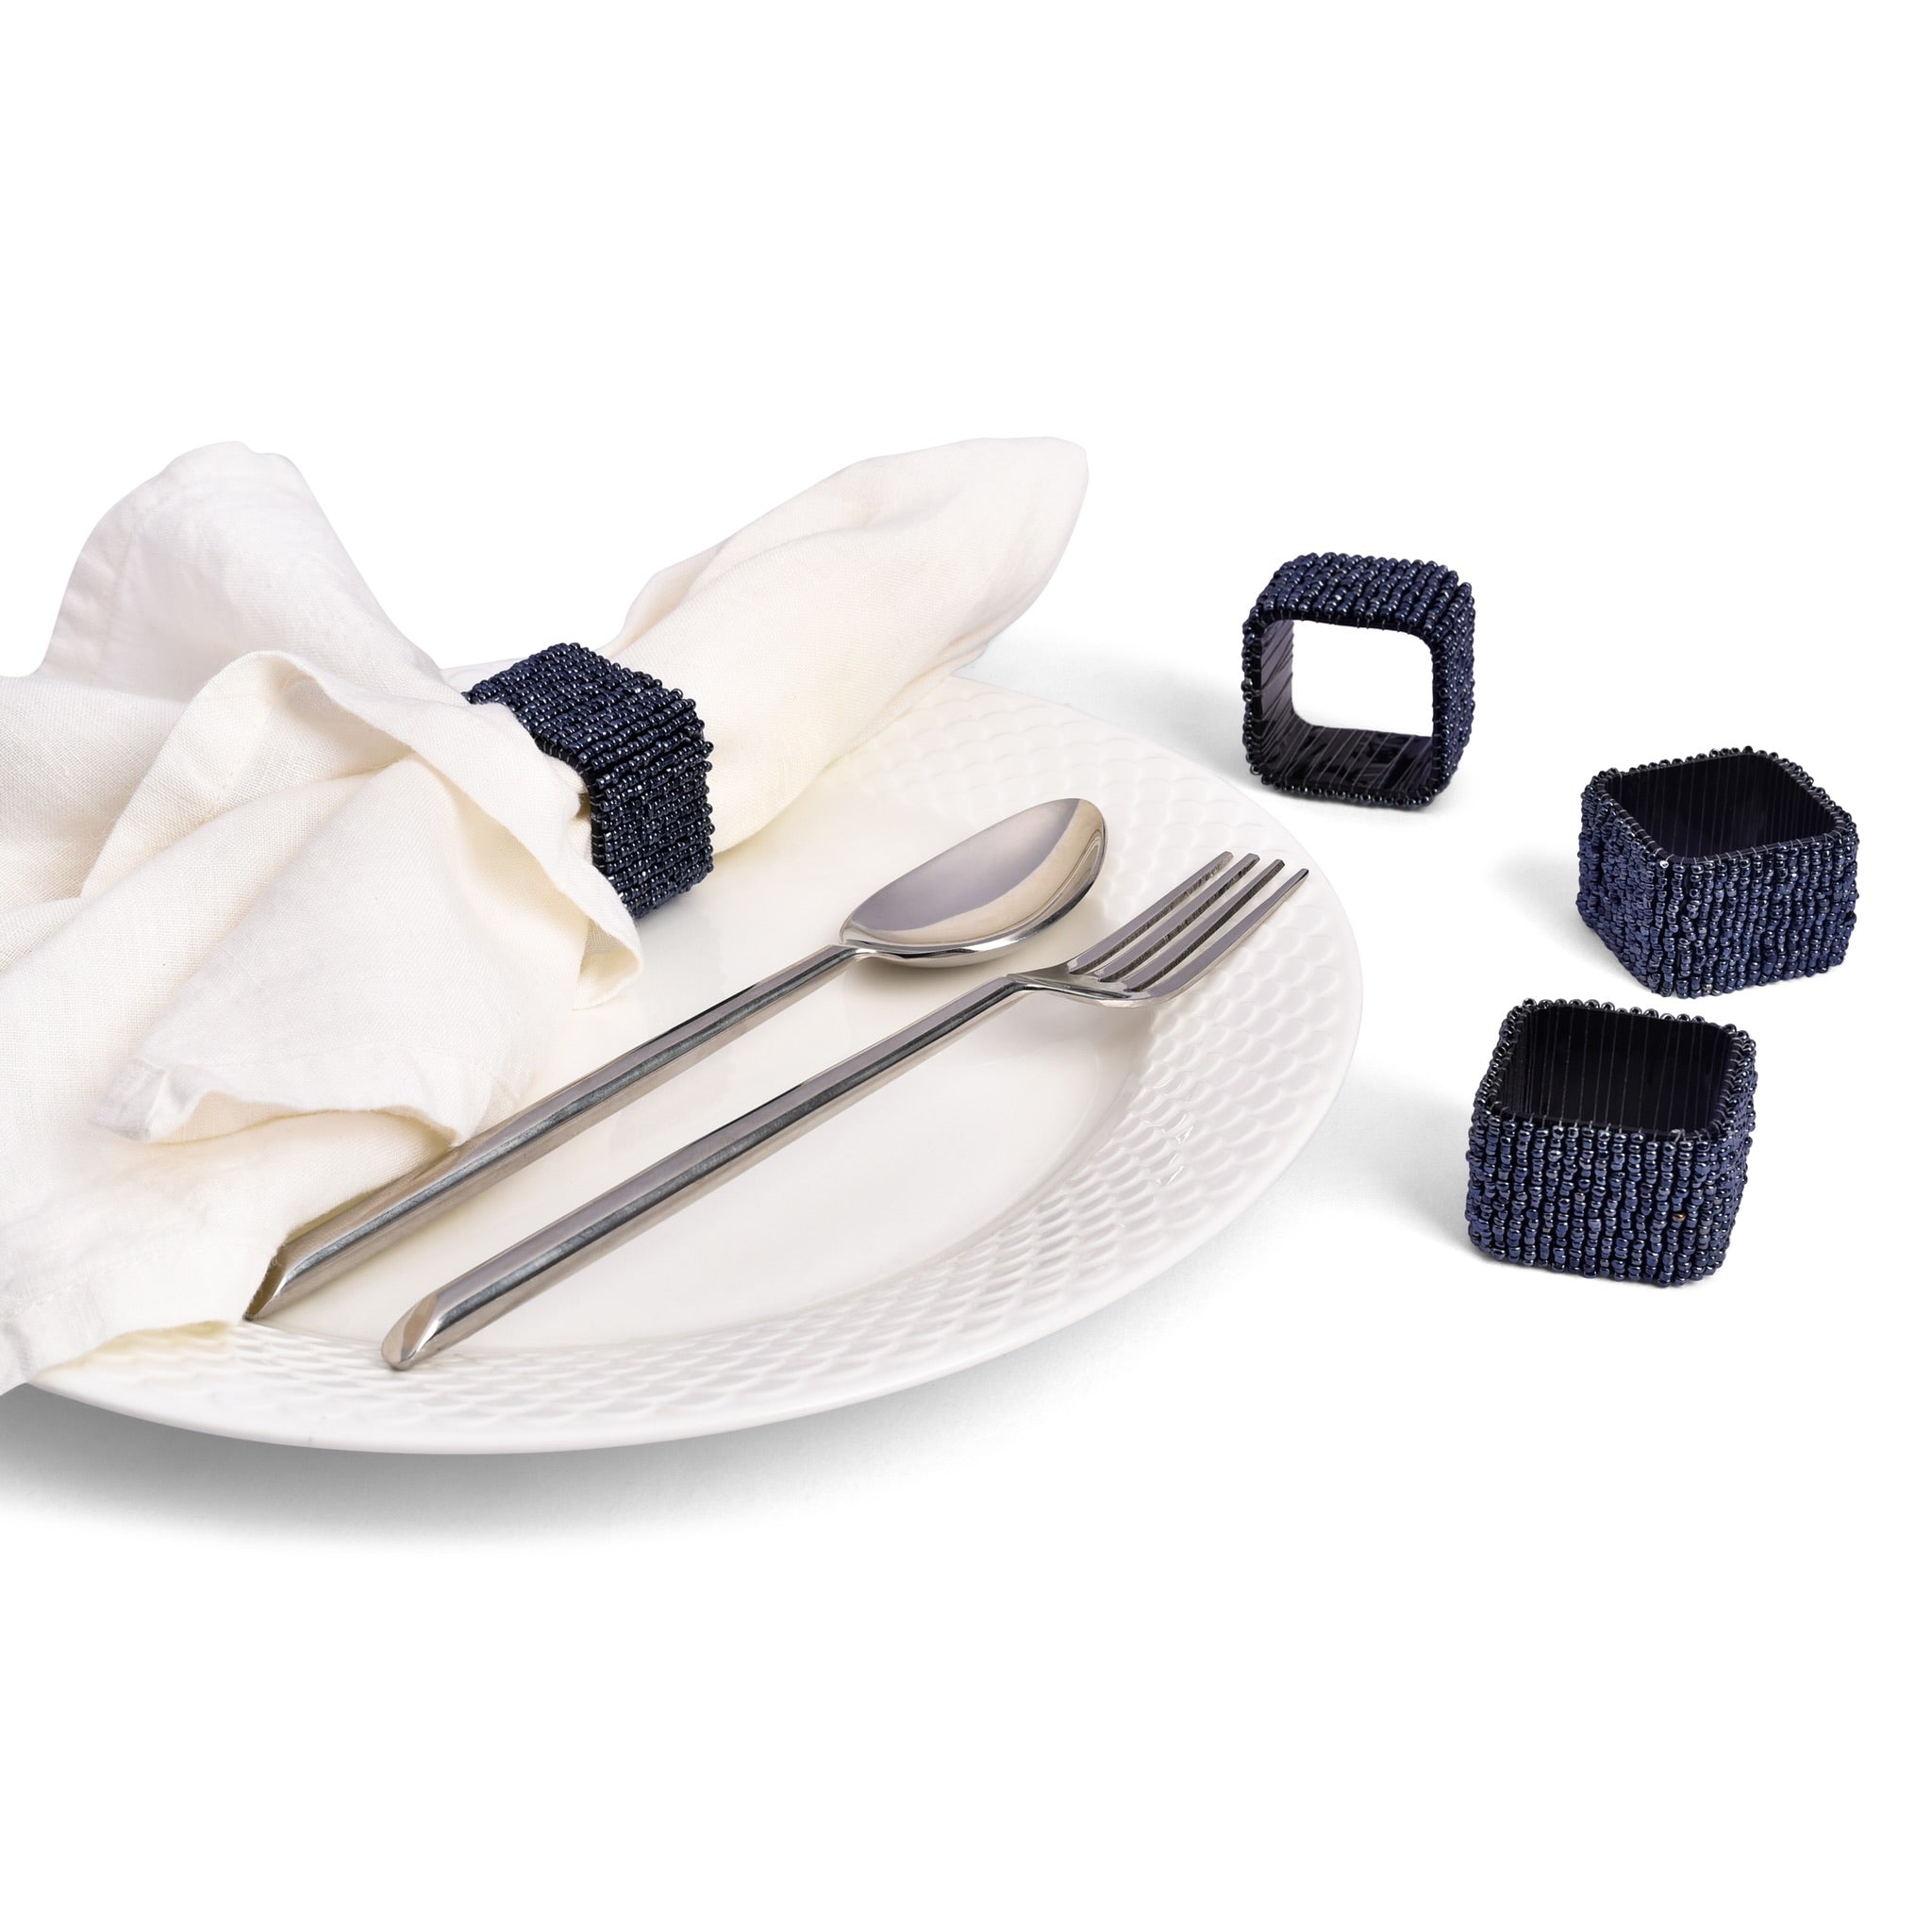 Classic Square Napkin Ring in Luster Blue, Set of 4